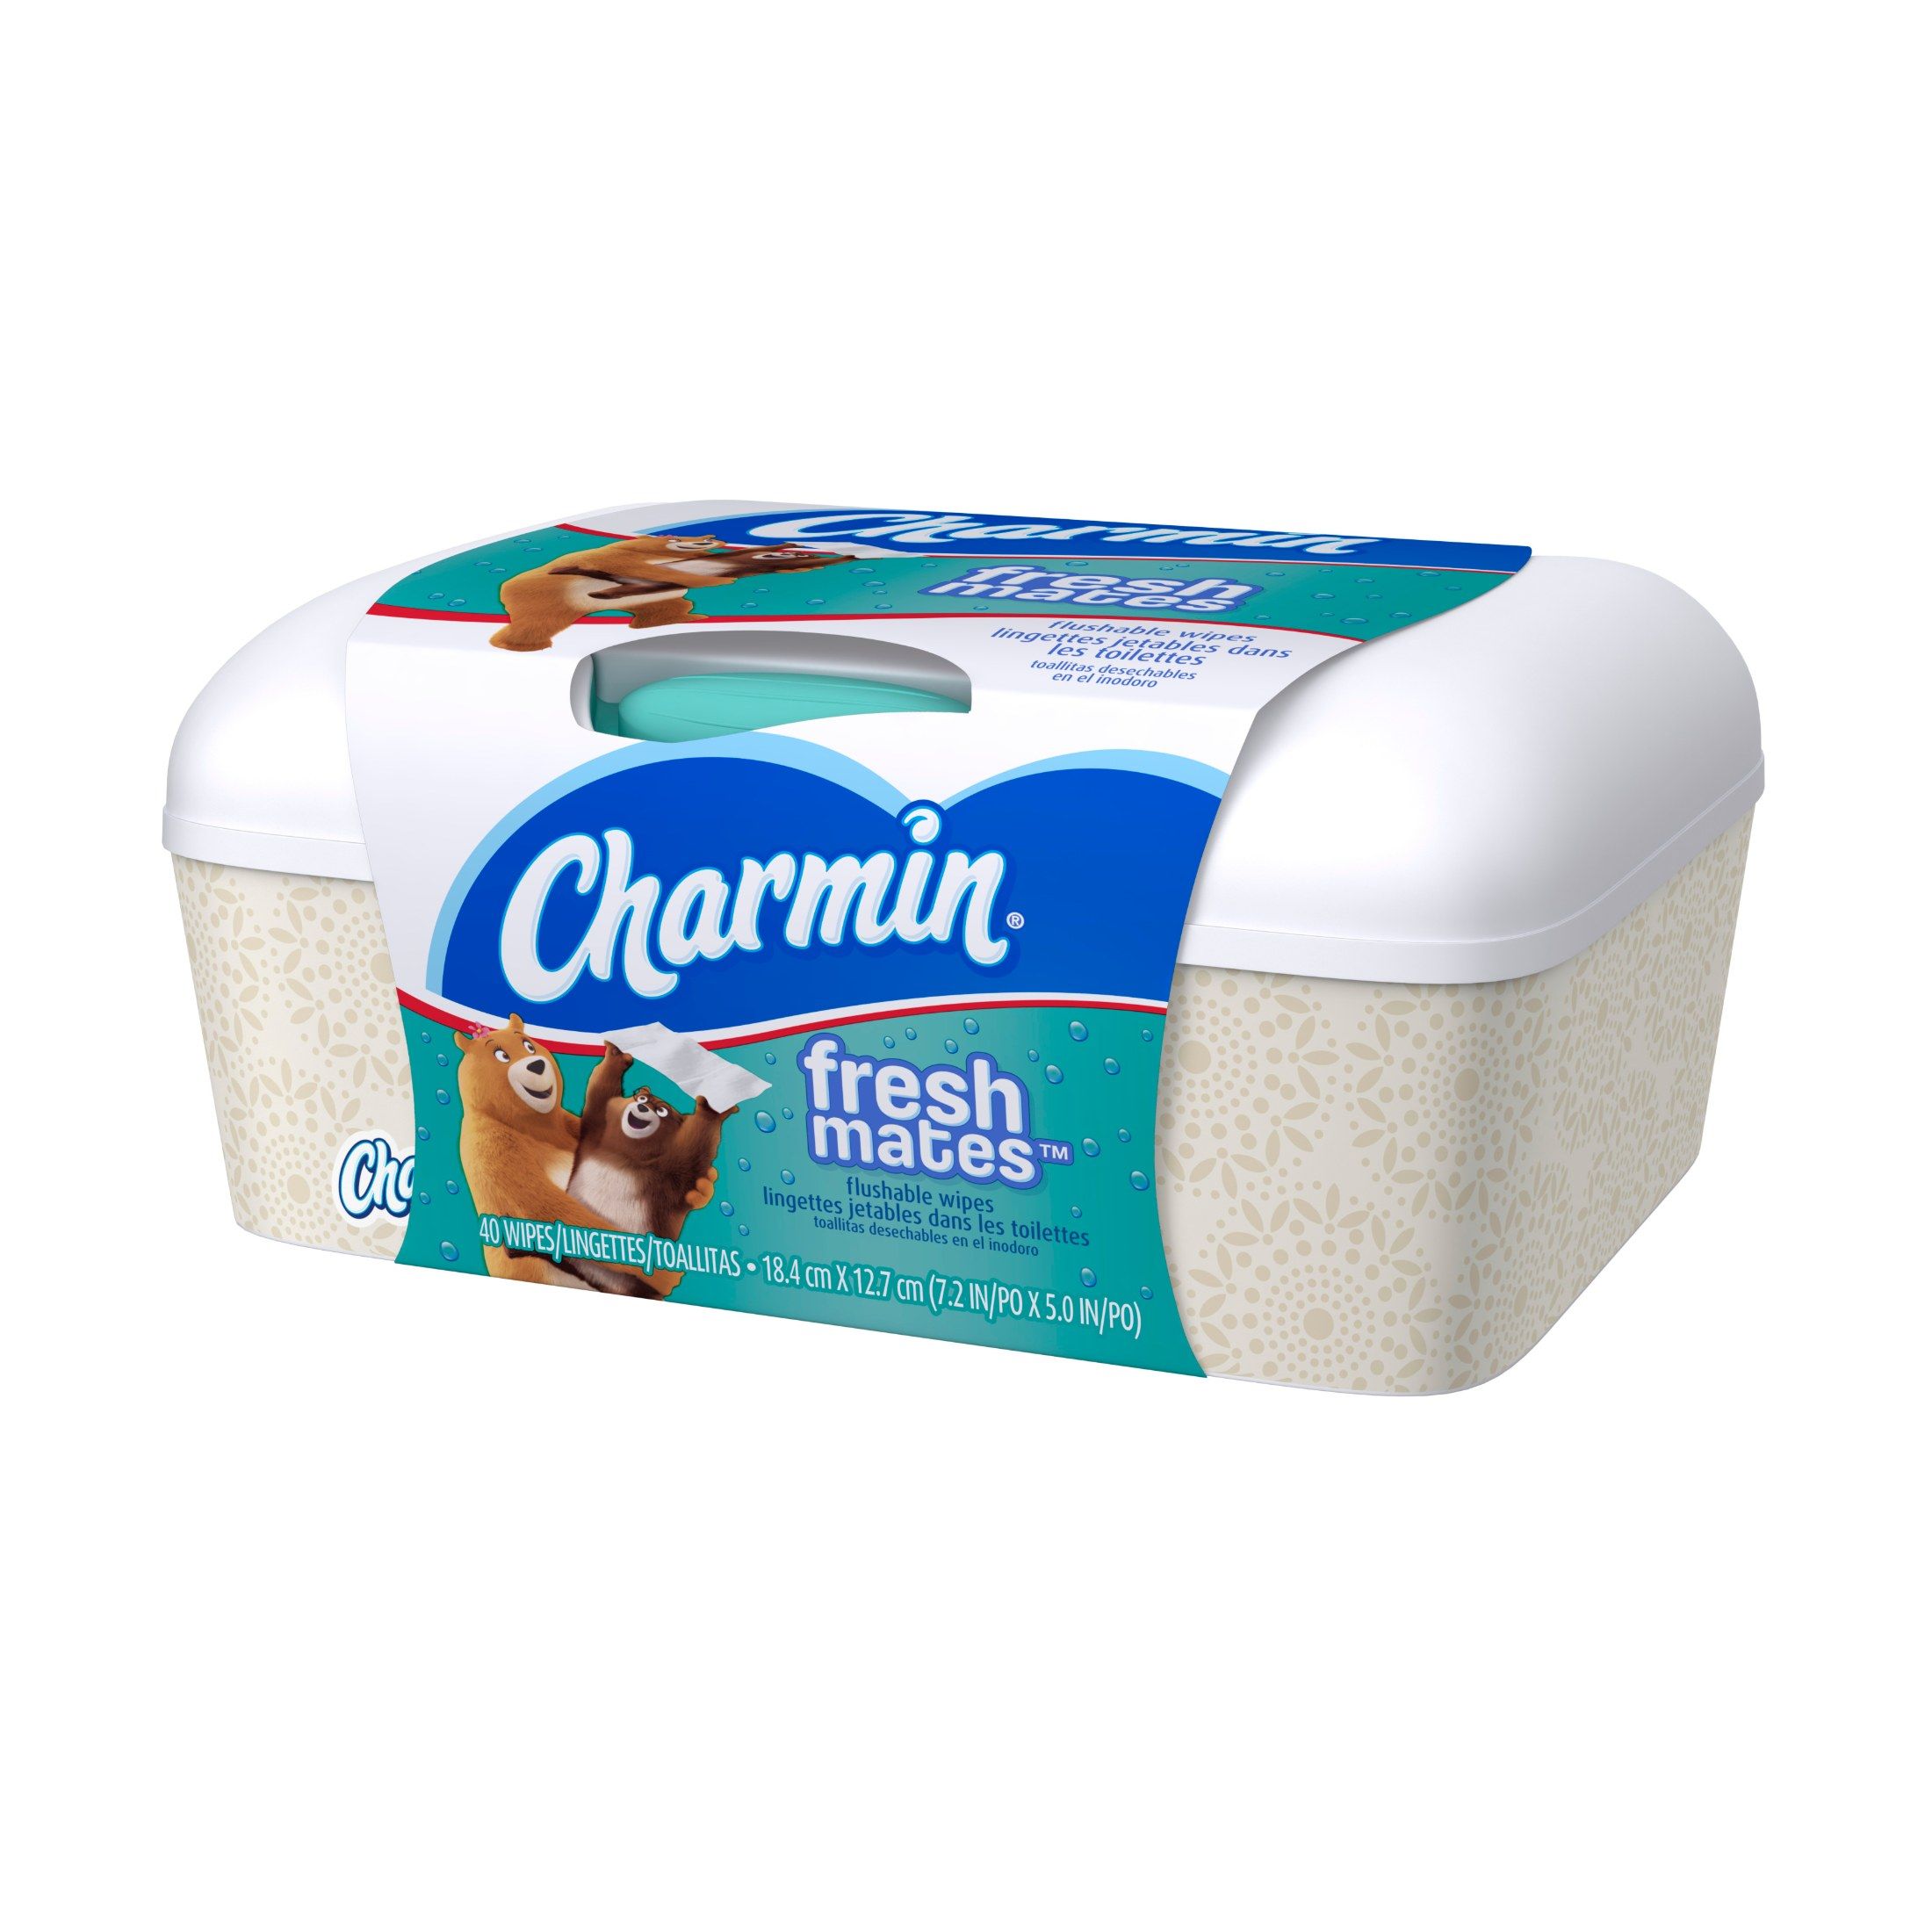 Charmin freshmates flushable wipes can allegedly clog plumbing.